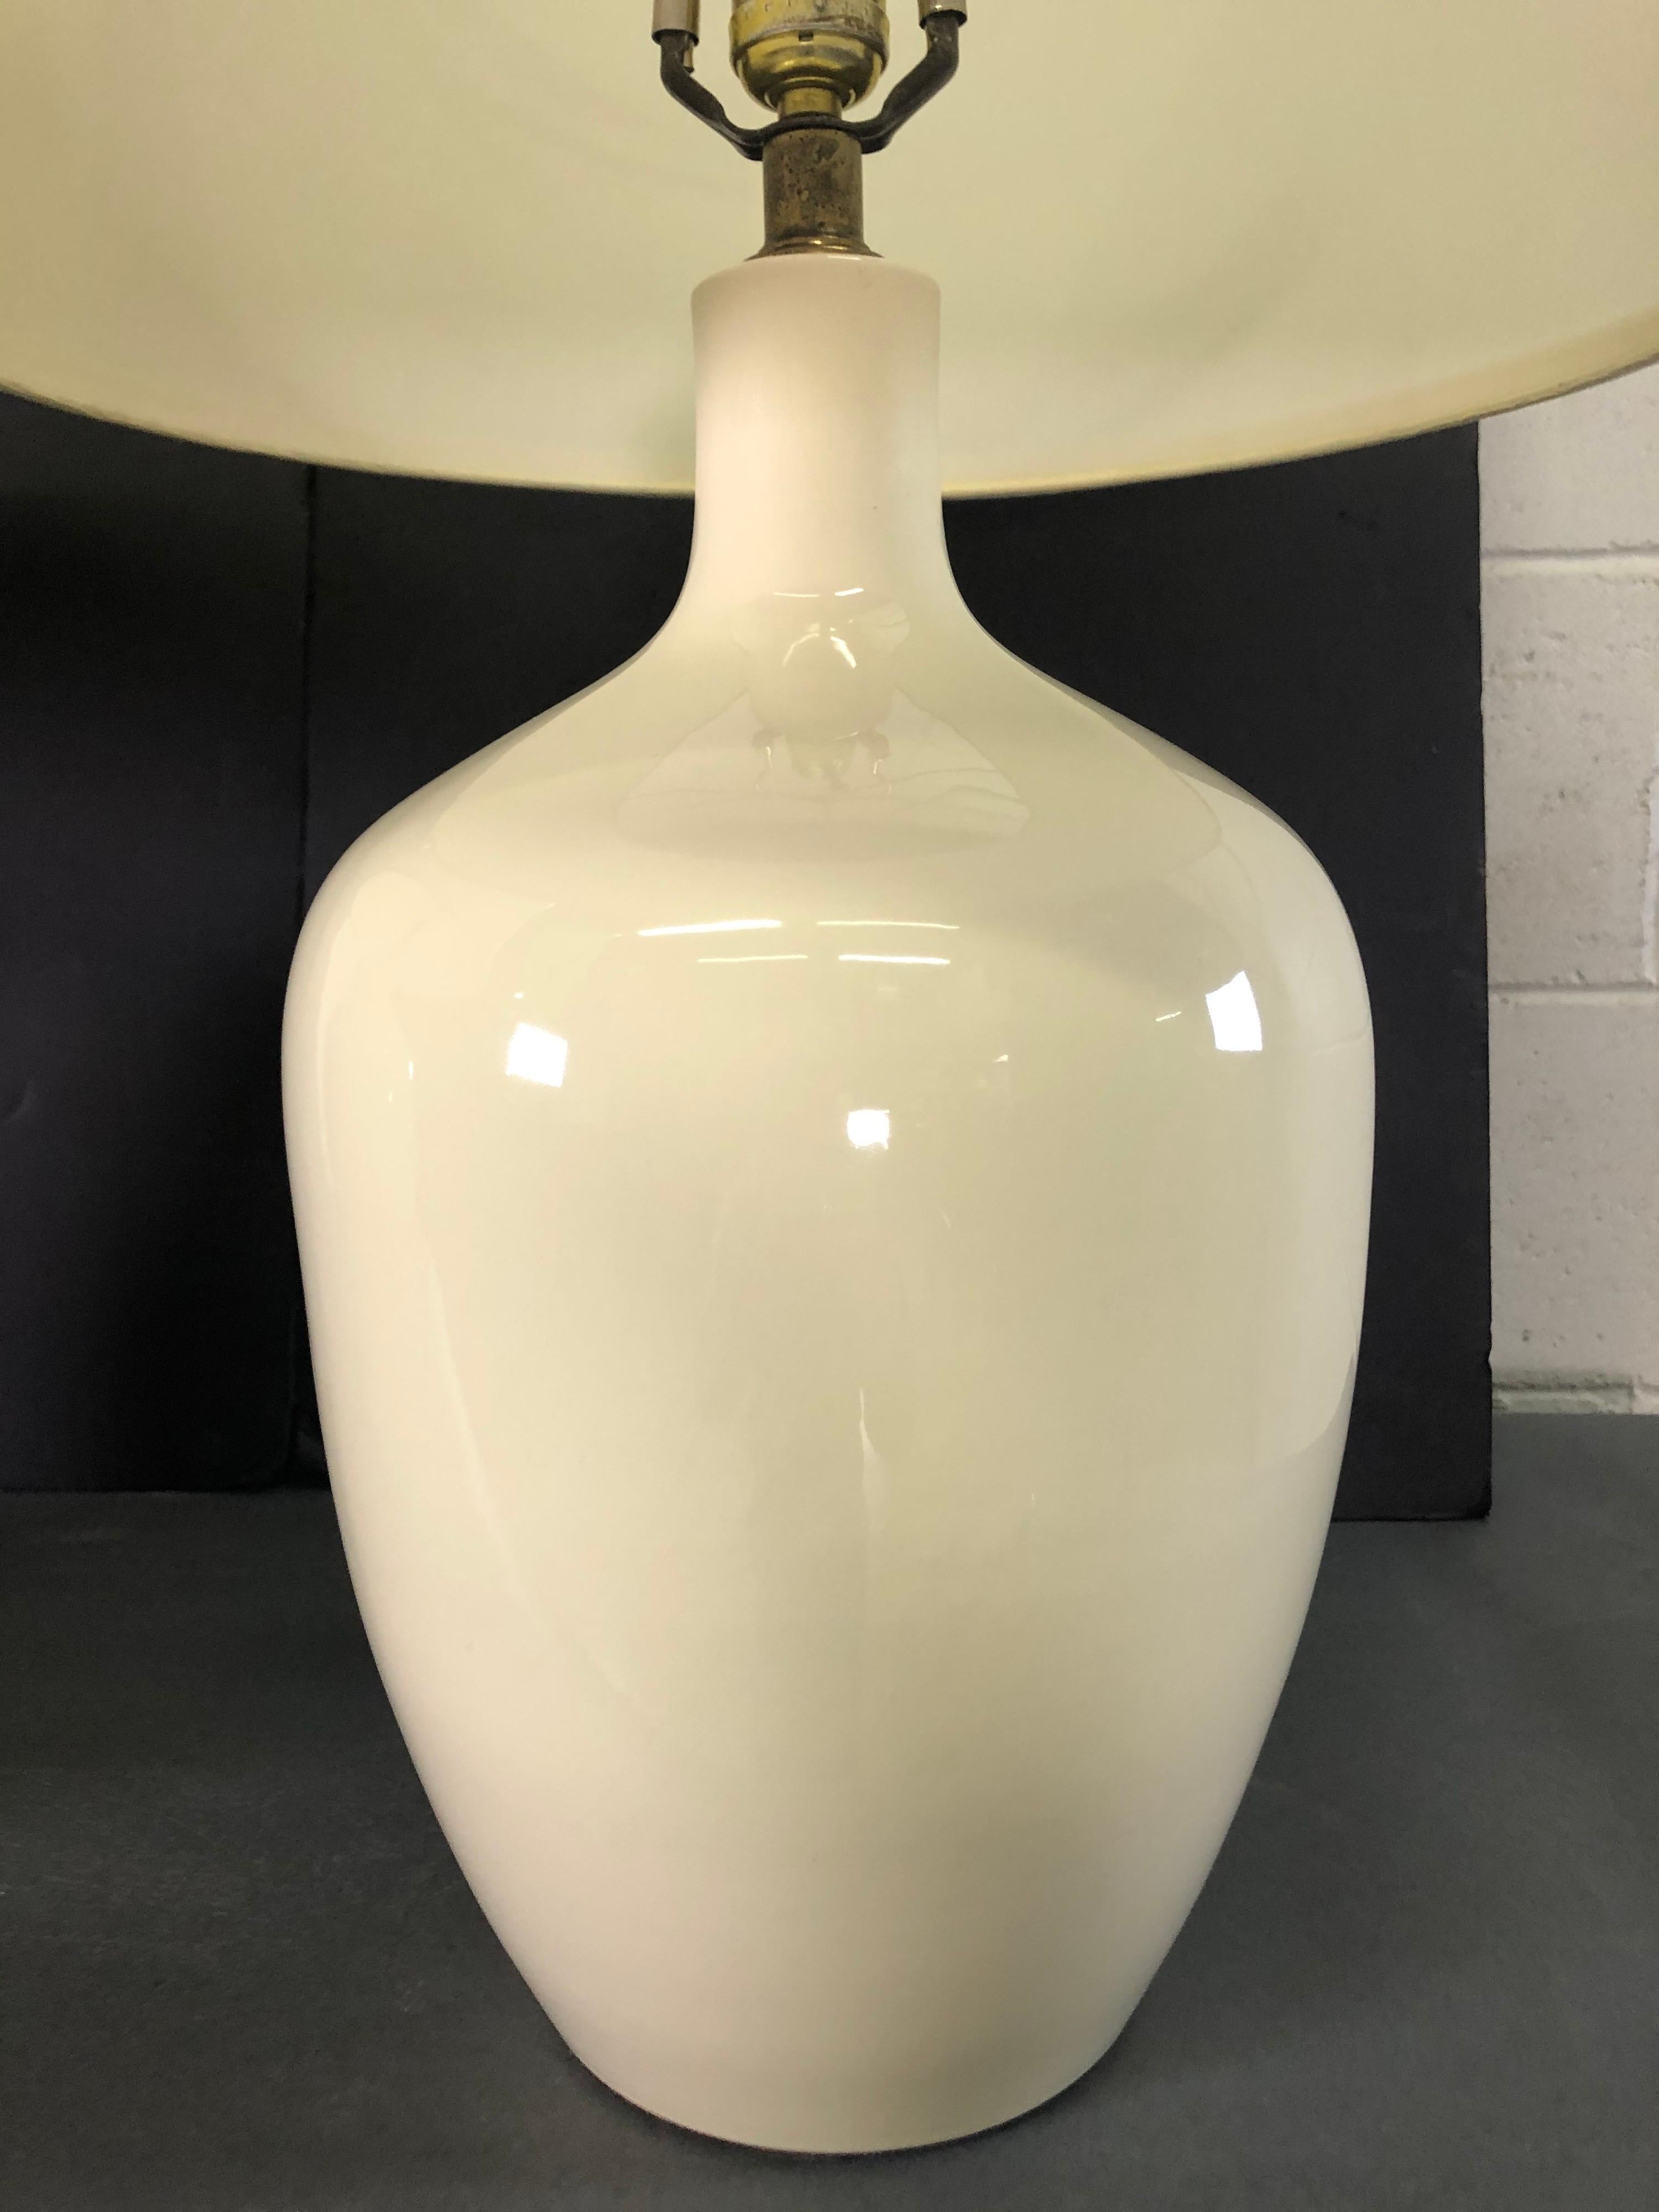 Vintage 1970s white ceramic barrel lamps by Haeger. Wired for the US and in working condition. Measures: Socket: 20” H. Harp: 4” W x 7” H. Marked. Shades not included.